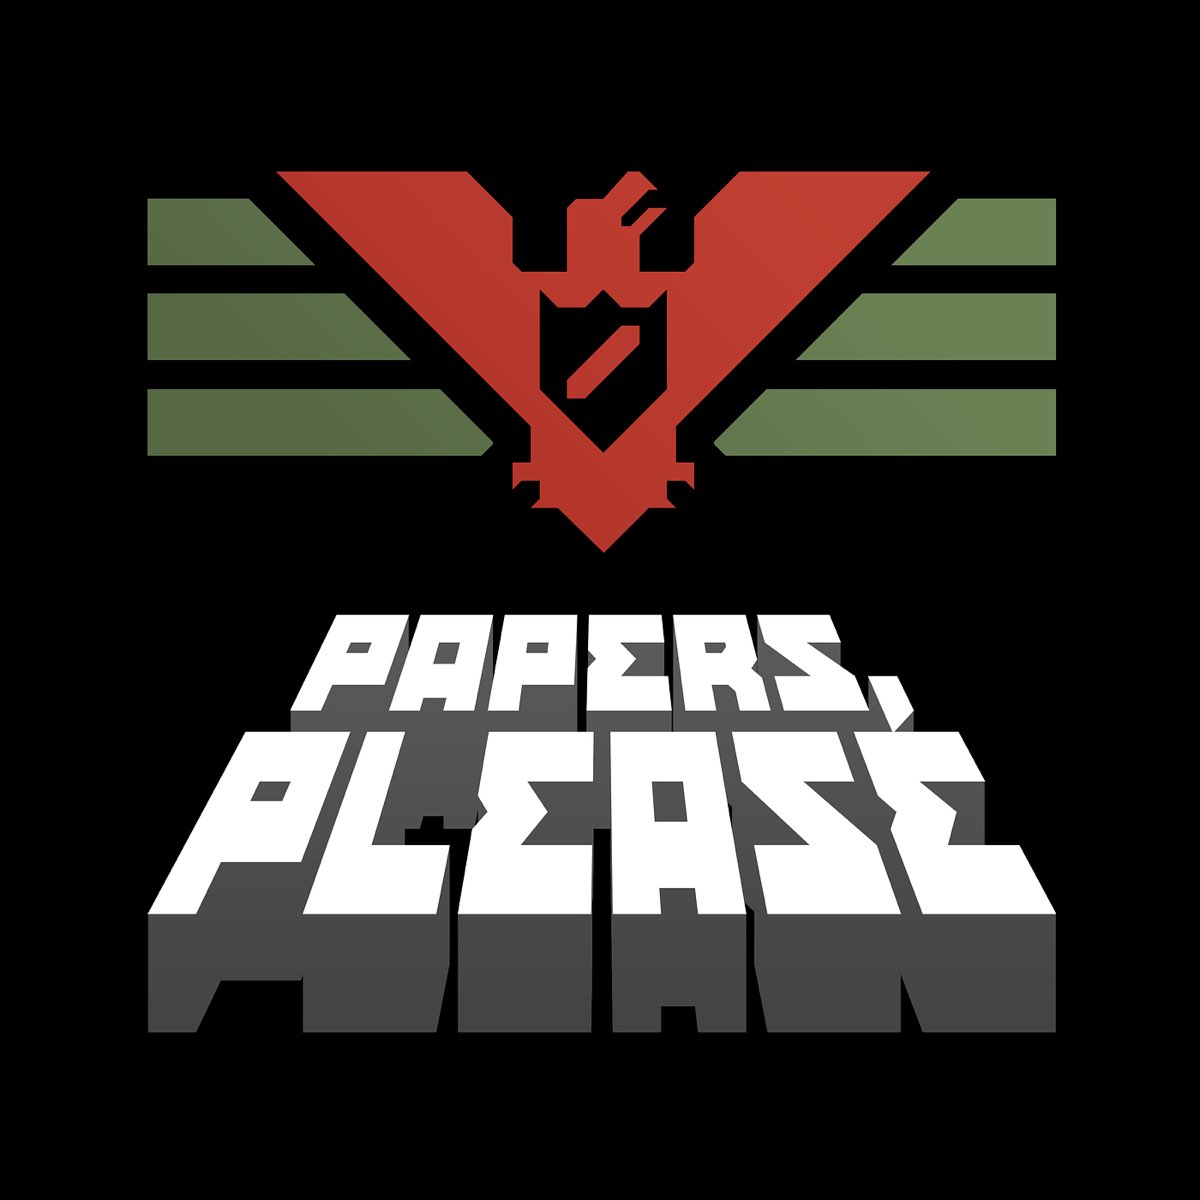 Showcase :: Papers, Please